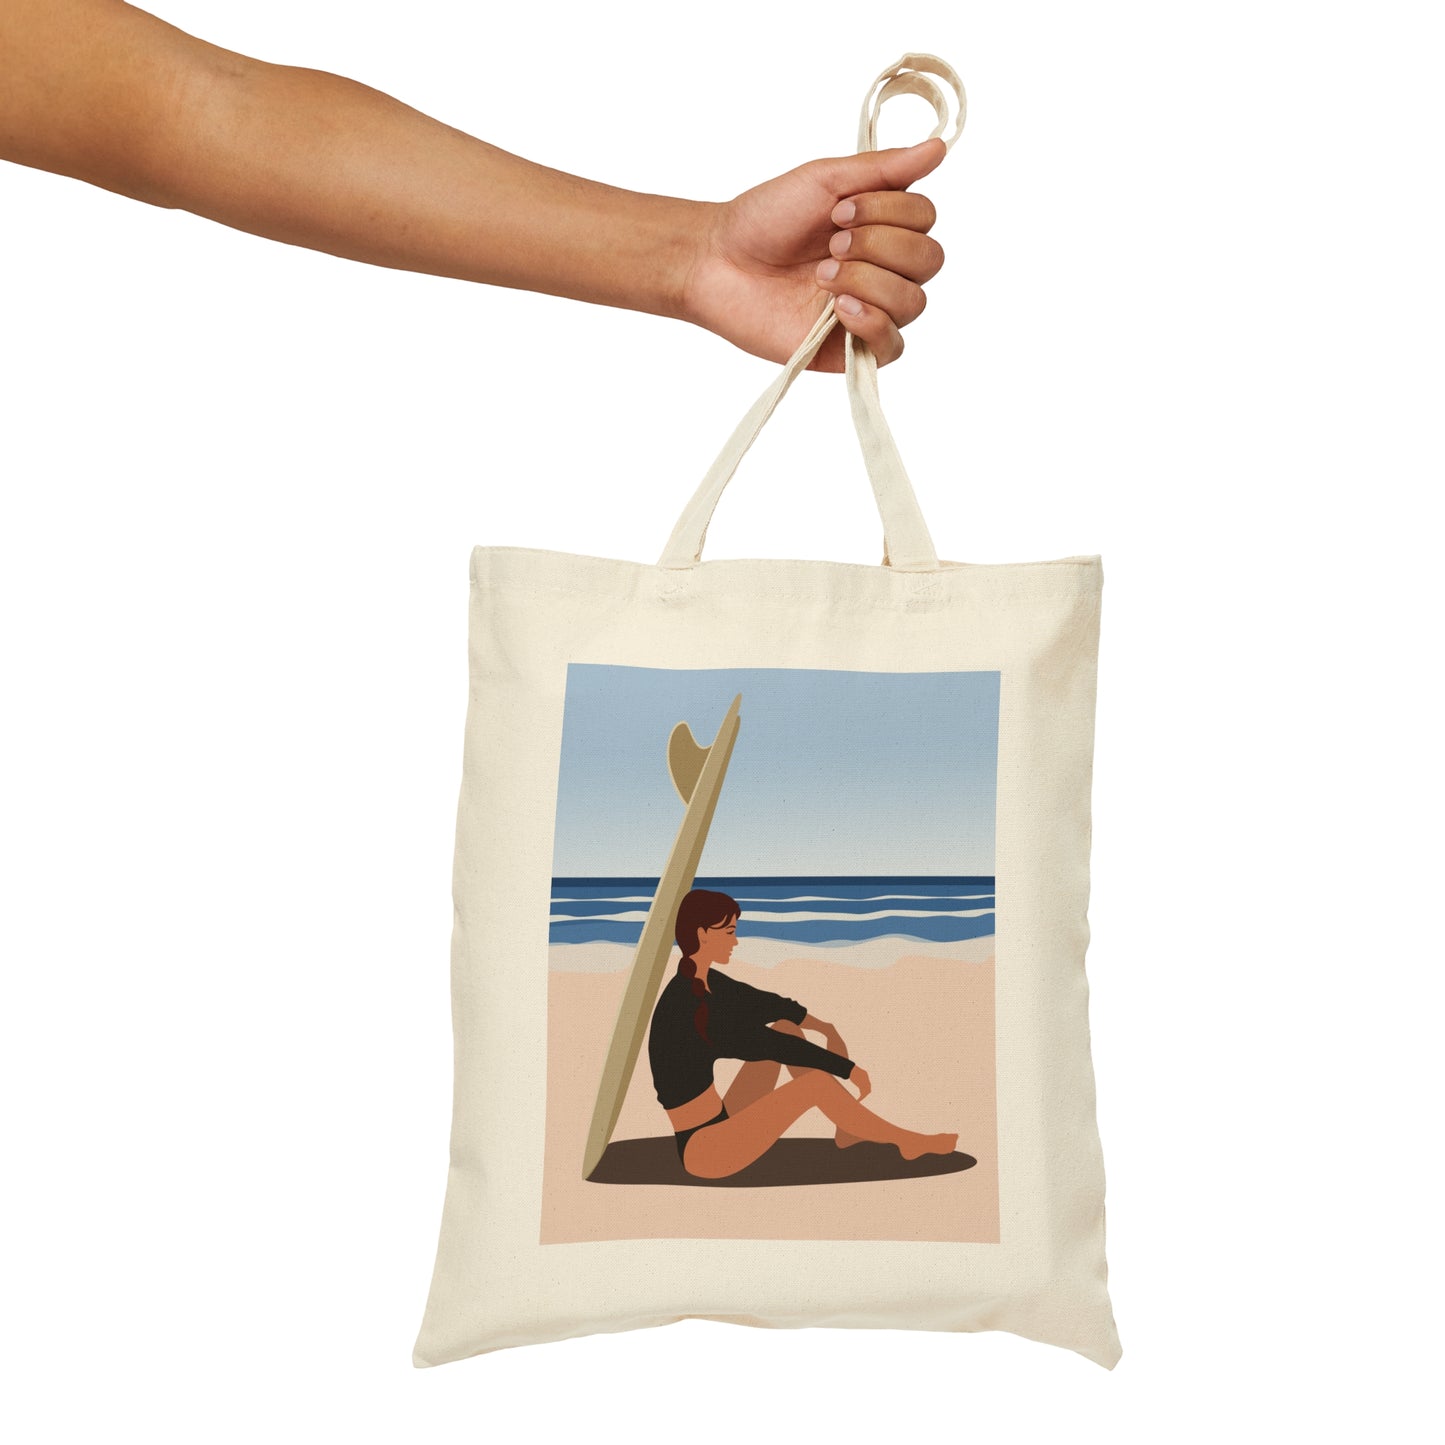 Serenity by the Sea Woman Sitting on Beach Canvas Shopping Cotton Tote Bag